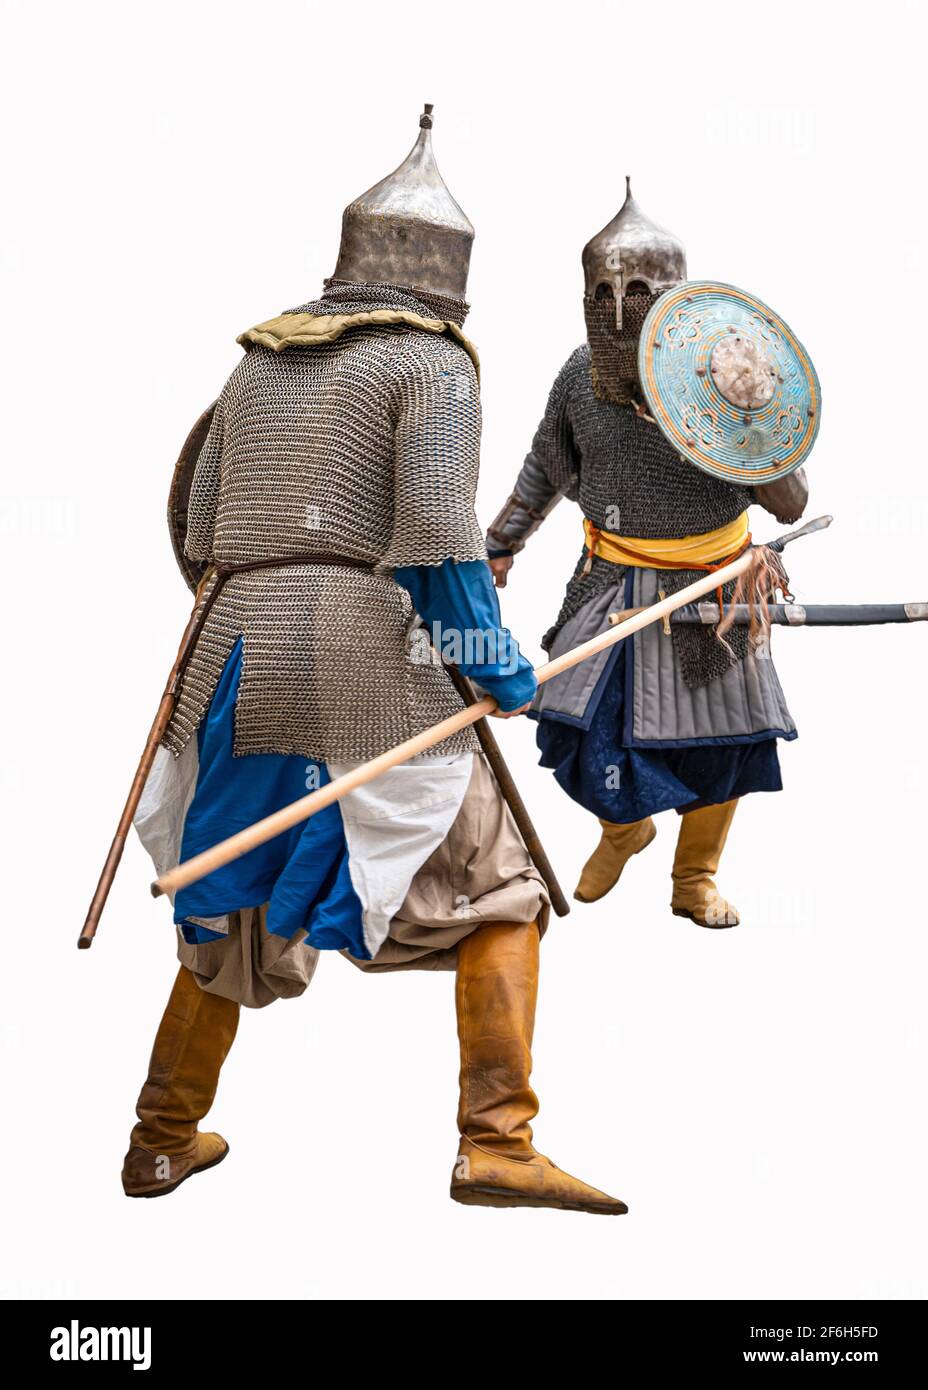 Two soldiers competing in a war with motion blurred. White background. Ancient Turkish metal and leather armor. Stock Photo